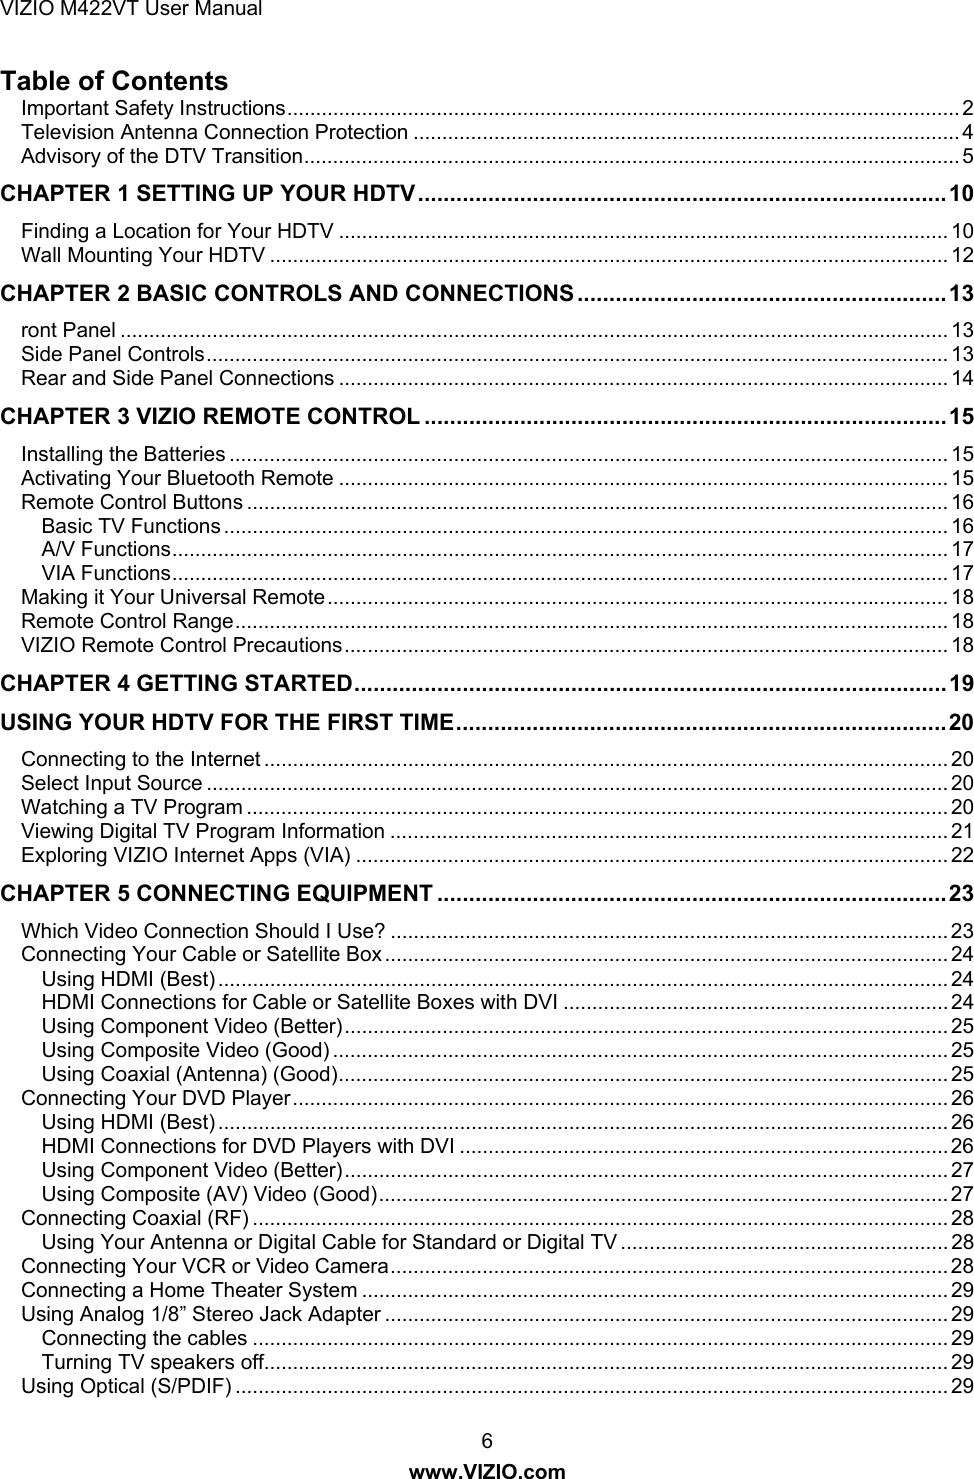 VIZIO M422VT User Manual 6 www.VIZIO.com Table of Contents Important Safety Instructions ..................................................................................................................... 2Television Antenna Connection Protection ............................................................................................... 4Advisory of the DTV Transition .................................................................................................................. 5CHAPTER 1 SETTING UP YOUR HDTV ................................................................................... 10Finding a Location for Your HDTV .......................................................................................................... 10Wall Mounting Your HDTV ...................................................................................................................... 12CHAPTER 2 BASIC CONTROLS AND CONNECTIONS .......................................................... 13ront Panel ................................................................................................................................................ 13Side Panel Controls ................................................................................................................................. 13Rear and Side Panel Connections .......................................................................................................... 14CHAPTER 3 VIZIO REMOTE CONTROL .................................................................................. 15Installing the Batteries ............................................................................................................................. 15Activating Your Bluetooth Remote .......................................................................................................... 15Remote Control Buttons .......................................................................................................................... 16Basic TV Functions .............................................................................................................................. 16A/V Functions ....................................................................................................................................... 17VIA Functions ....................................................................................................................................... 17Making it Your Universal Remote ............................................................................................................ 18Remote Control Range ............................................................................................................................ 18VIZIO Remote Control Precautions ......................................................................................................... 18CHAPTER 4 GETTING STARTED ............................................................................................. 19USING YOUR HDTV FOR THE FIRST TIME ............................................................................. 20Connecting to the Internet ....................................................................................................................... 20Select Input Source ................................................................................................................................. 20Watching a TV Program .......................................................................................................................... 20Viewing Digital TV Program Information ................................................................................................. 21Exploring VIZIO Internet Apps (VIA) ....................................................................................................... 22CHAPTER 5 CONNECTING EQUIPMENT ................................................................................ 23Which Video Connection Should I Use? ................................................................................................. 23Connecting Your Cable or Satellite Box .................................................................................................. 24Using HDMI (Best) ............................................................................................................................... 24HDMI Connections for Cable or Satellite Boxes with DVI ................................................................... 24Using Component Video (Better) ......................................................................................................... 25Using Composite Video (Good) ........................................................................................................... 25Using Coaxial (Antenna) (Good) .......................................................................................................... 25Connecting Your DVD Player .................................................................................................................. 26Using HDMI (Best) ............................................................................................................................... 26HDMI Connections for DVD Players with DVI ..................................................................................... 26Using Component Video (Better) ......................................................................................................... 27Using Composite (AV) Video (Good) ................................................................................................... 27Connecting Coaxial (RF) ......................................................................................................................... 28Using Your Antenna or Digital Cable for Standard or Digital TV ......................................................... 28Connecting Your VCR or Video Camera ................................................................................................. 28Connecting a Home Theater System ...................................................................................................... 29Using Analog 1/8” Stereo Jack Adapter .................................................................................................. 29Connecting the cables ......................................................................................................................... 29Turning TV speakers off....................................................................................................................... 29Using Optical (S/PDIF) ............................................................................................................................ 29